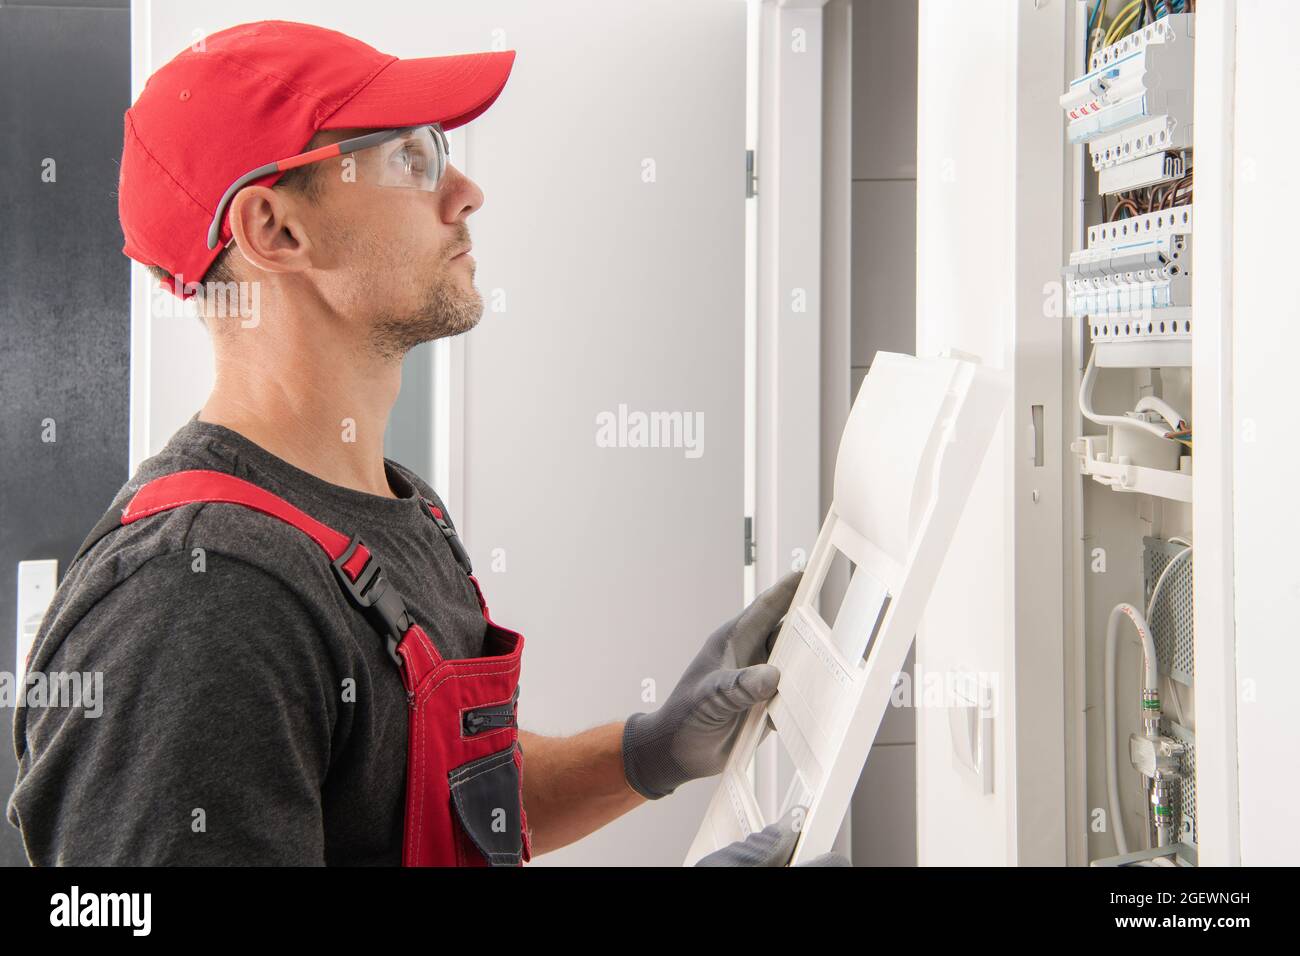 Residential Electric Systems. Professional Caucasian Electrician in His 40s Wearing Red Uniform and Safety Glasses Checking Residential Apartment Fuse Stock Photo